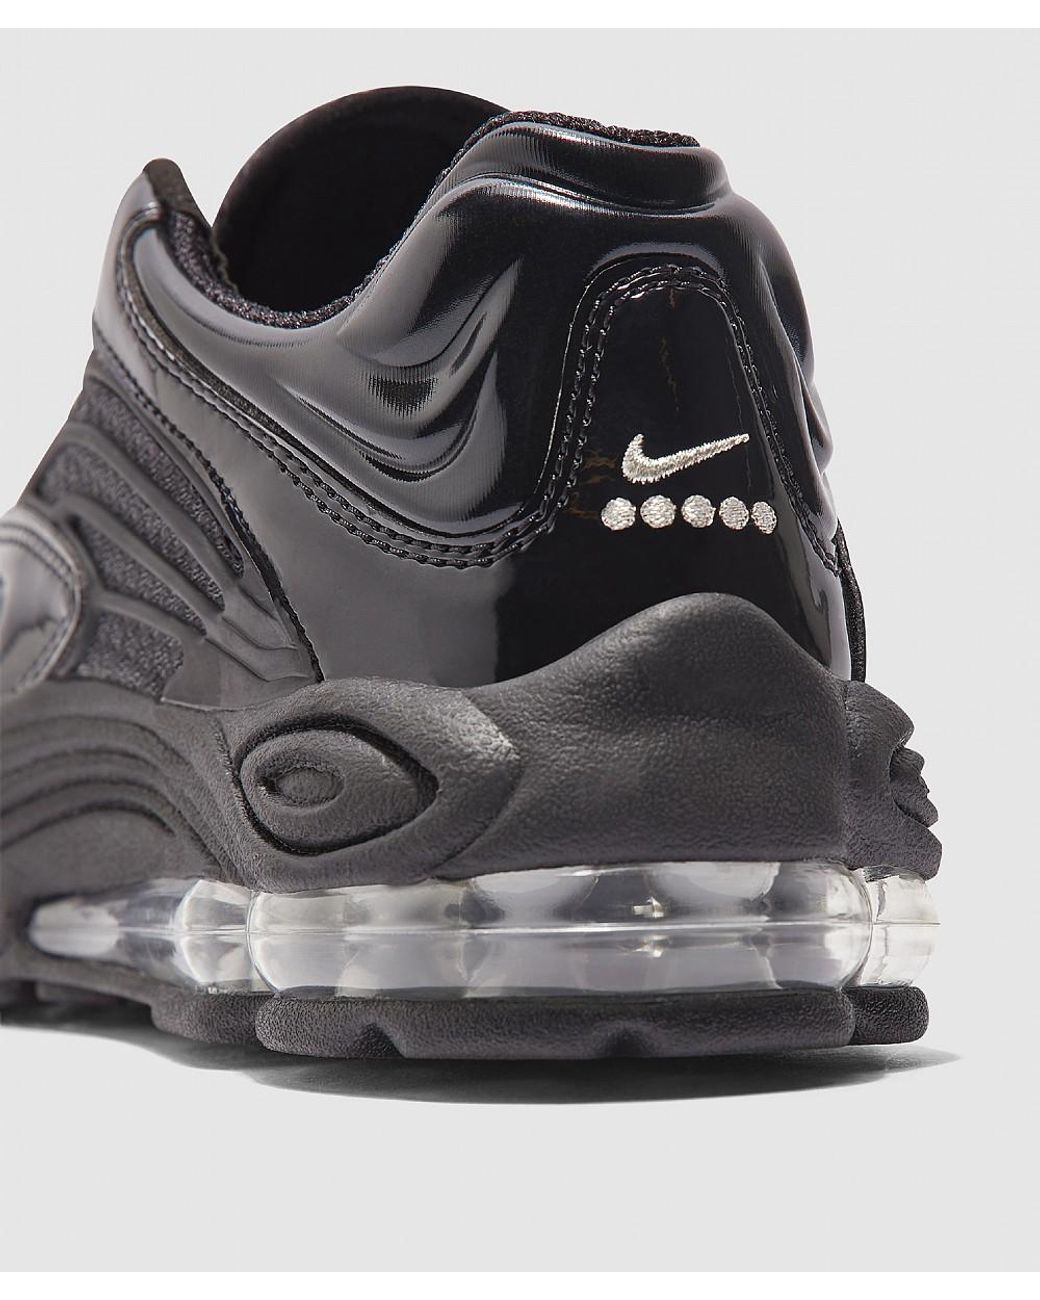 Nike Leather Air Tuned Max 99 Sneaker in Black/Black/Metallic Silver  (Black) for Men | Lyst Canada